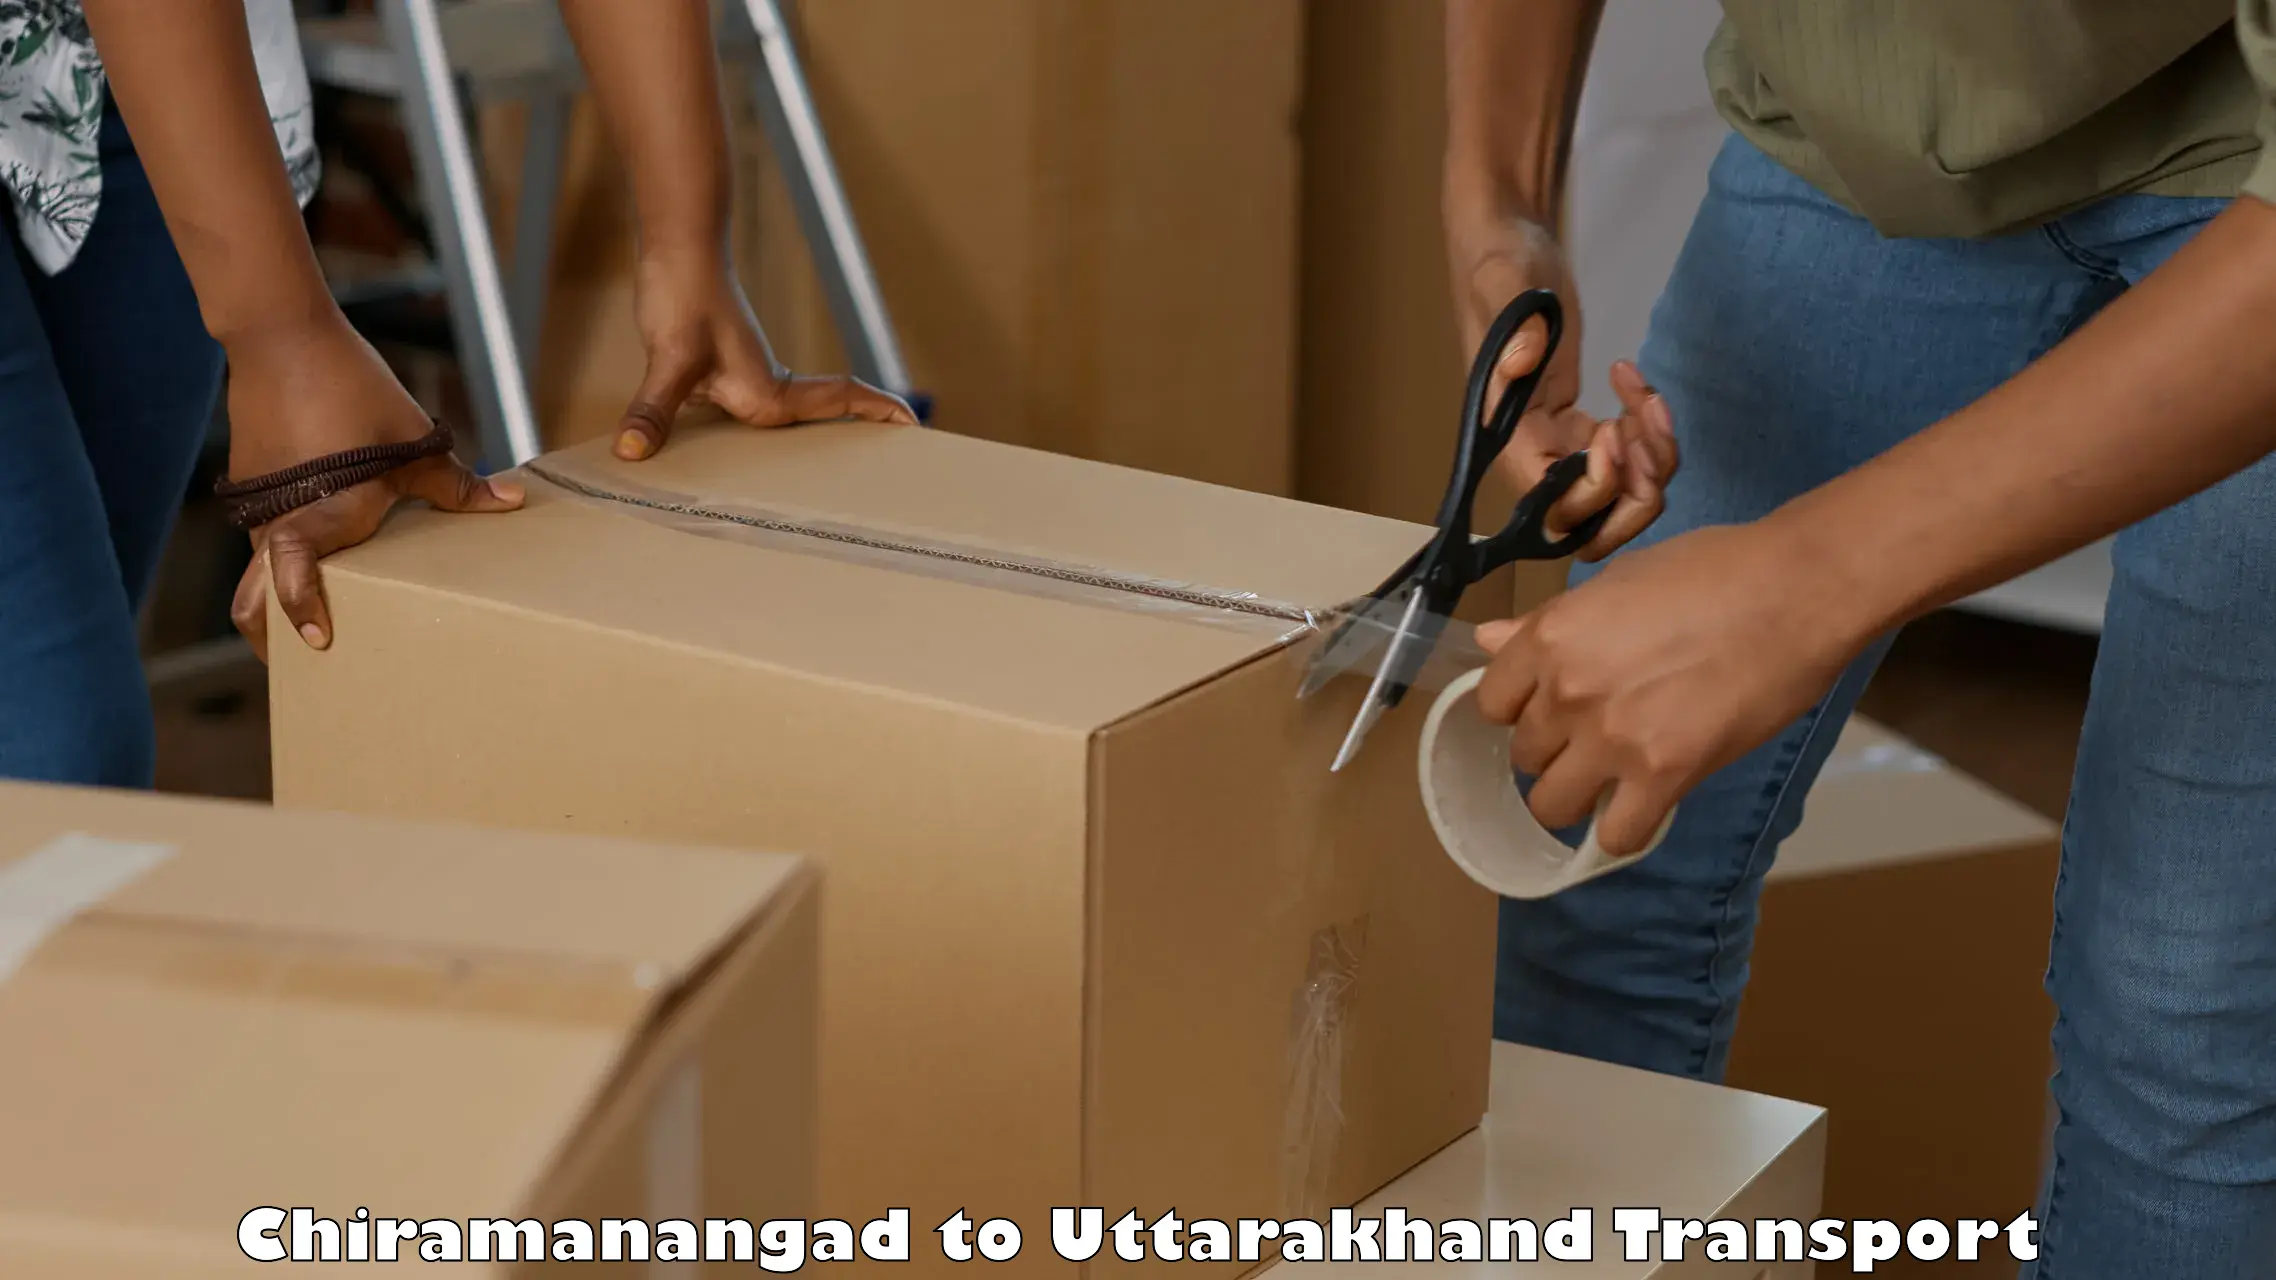 Commercial transport service Chiramanangad to Roorkee